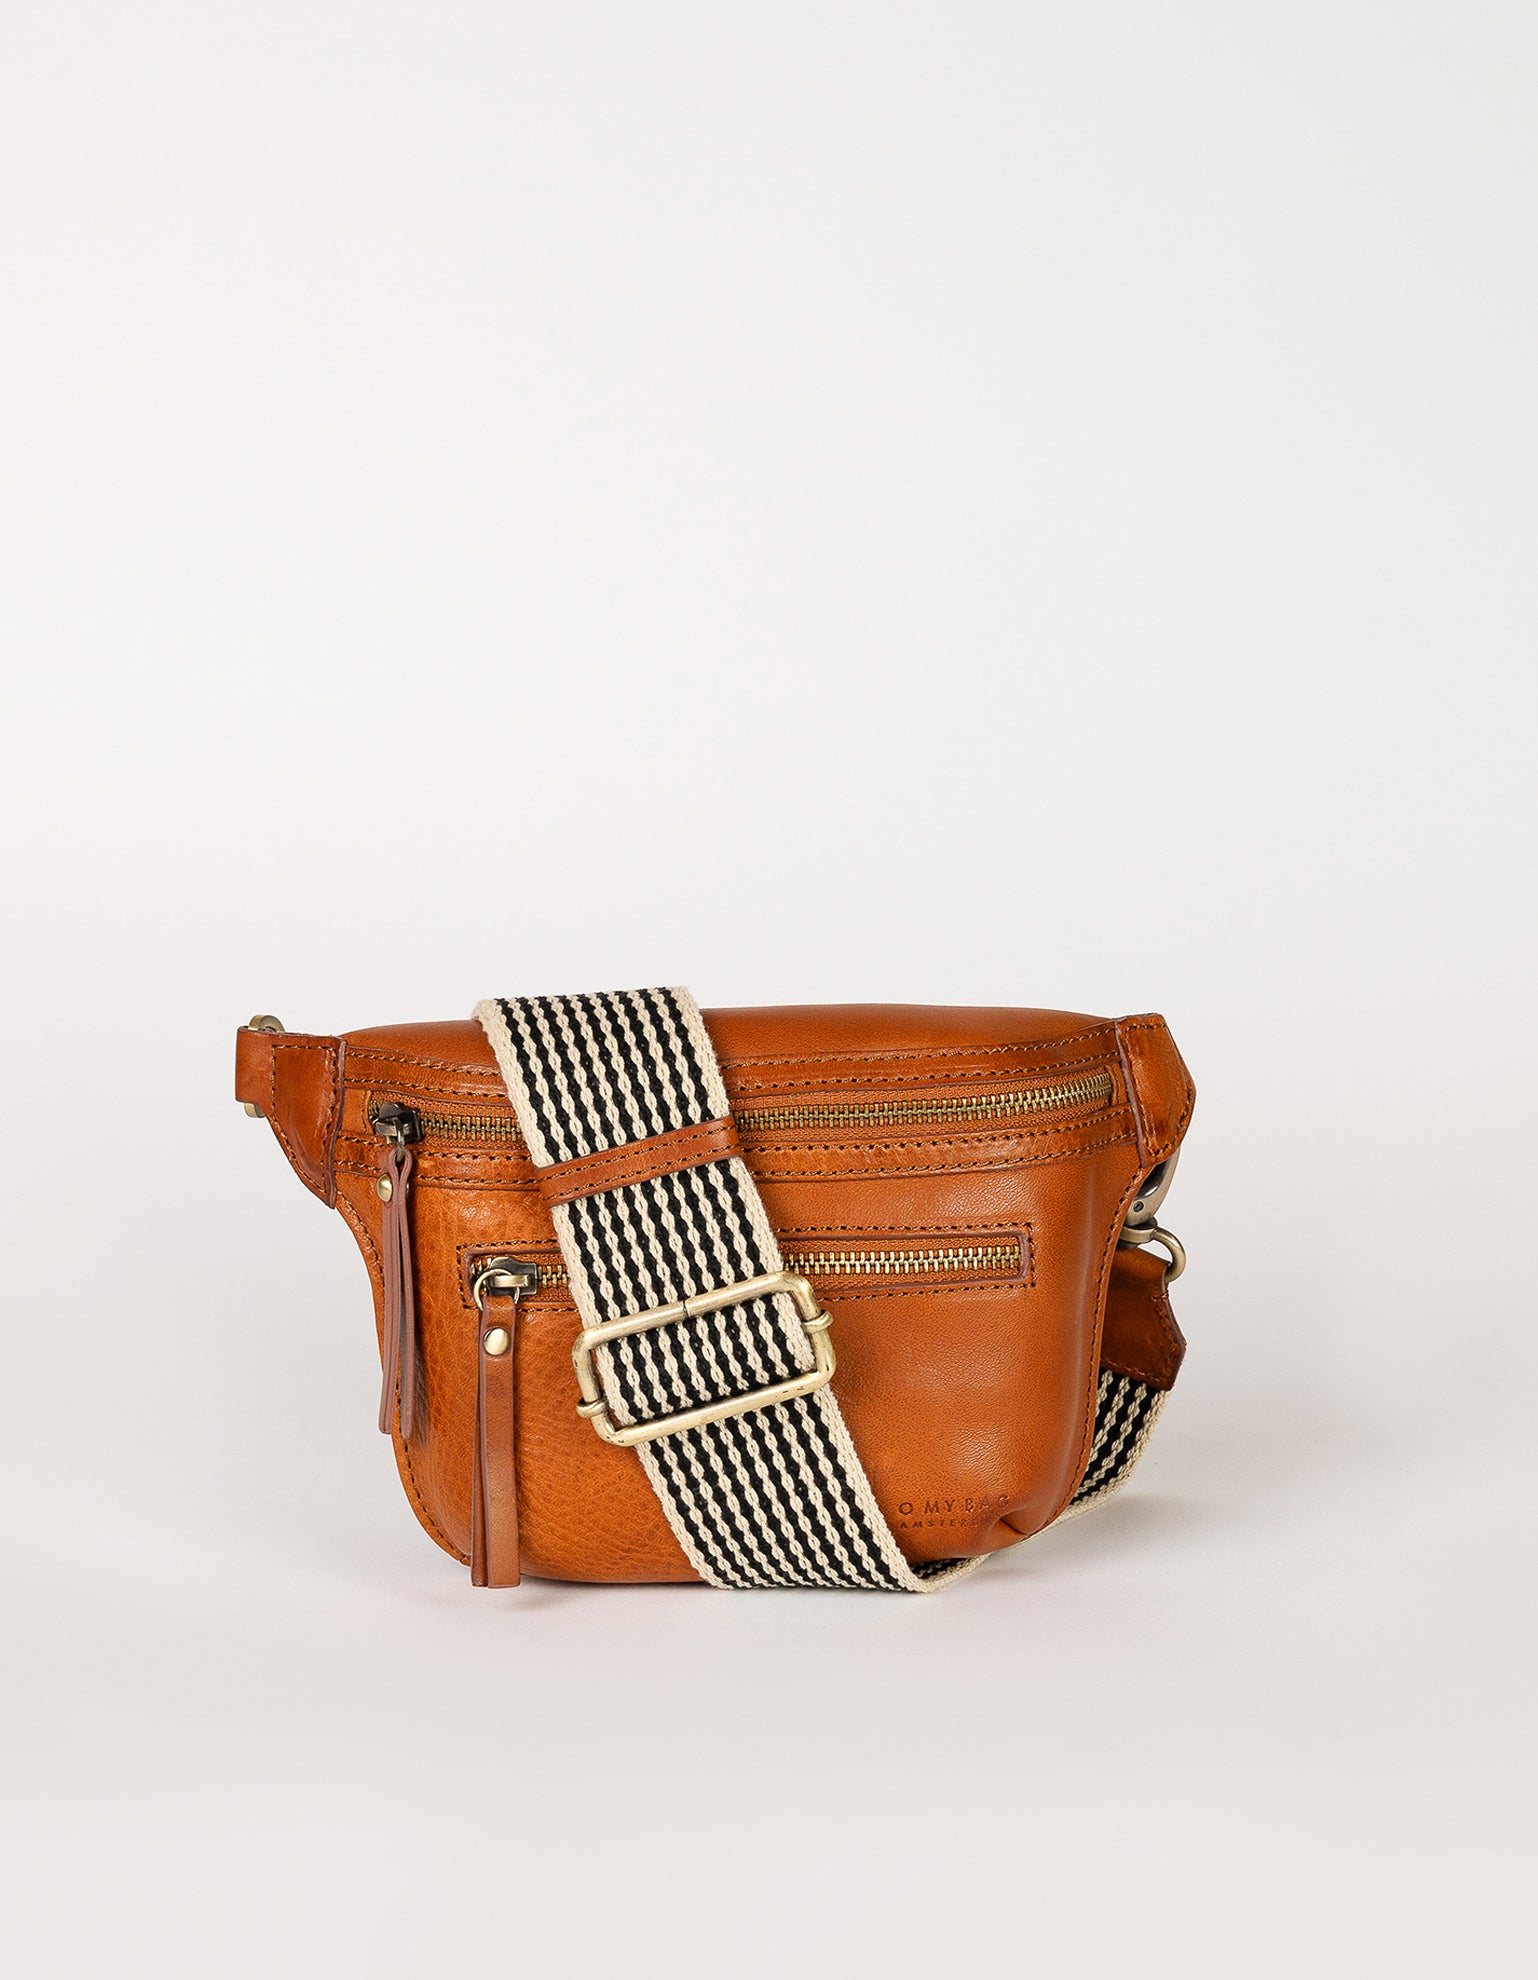 Cognac Leather womens fanny pack. Square shape with an adjustable strap. Front product image.